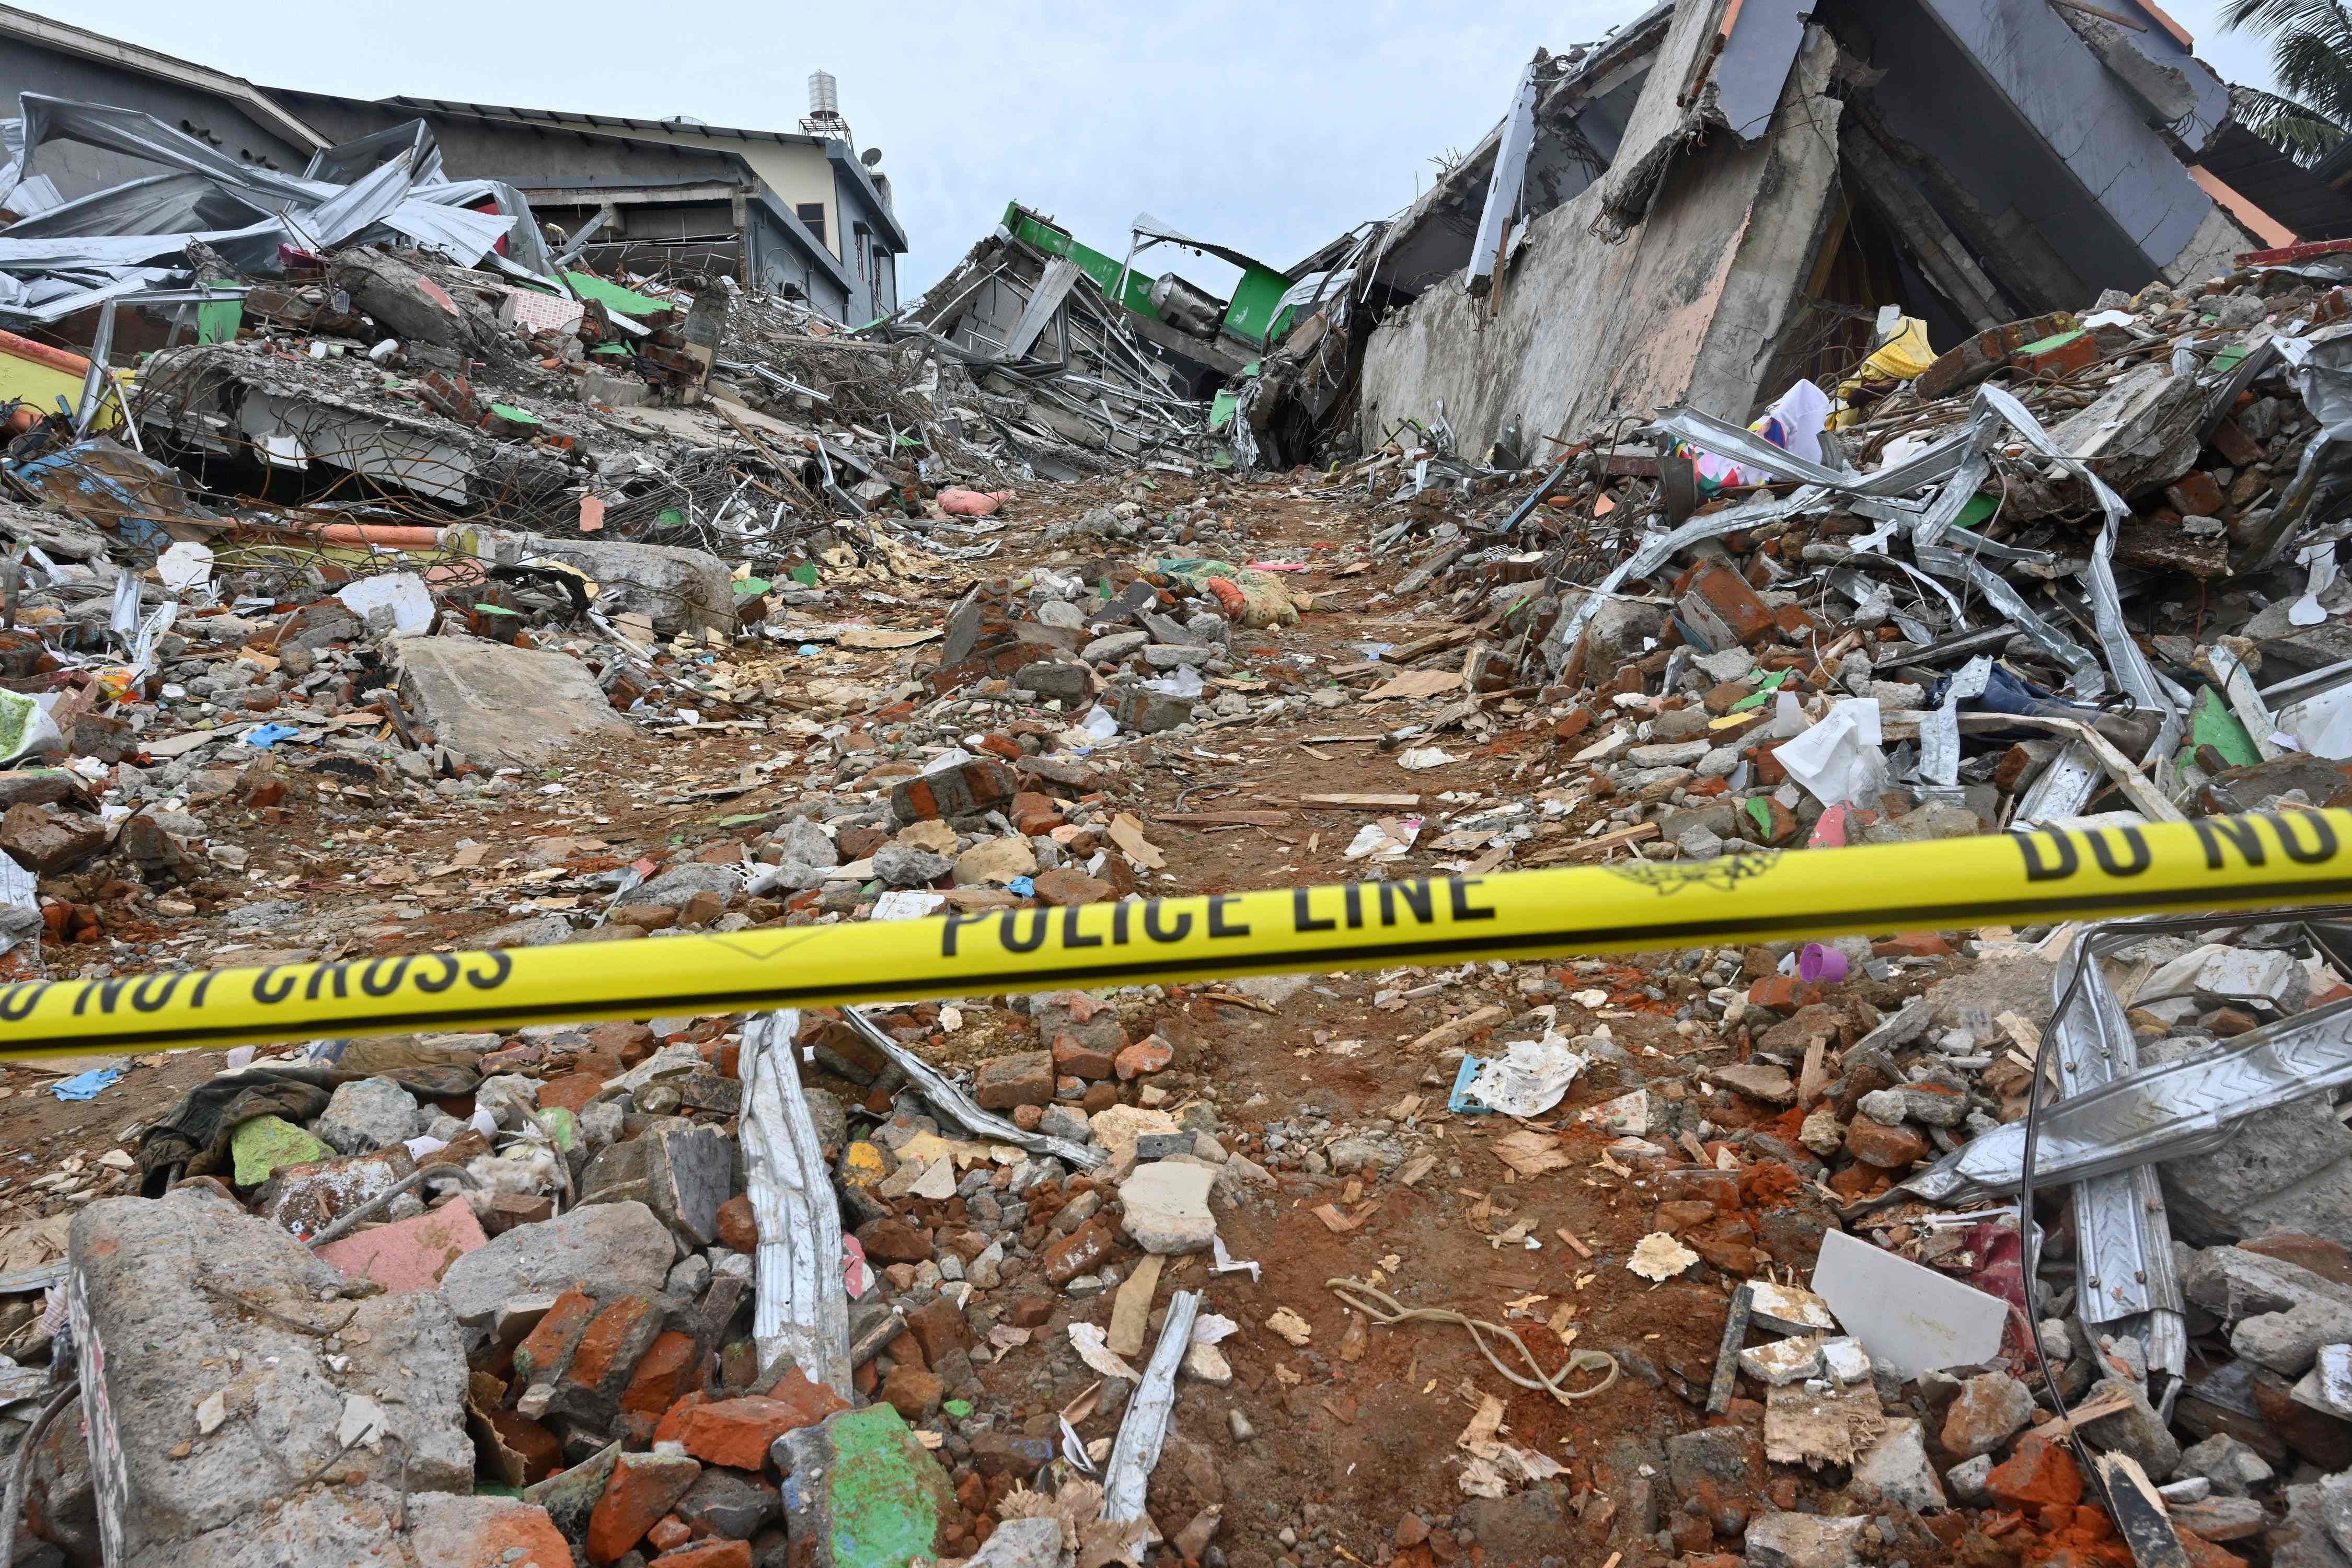 A police line is placed at a damaged building following a 6.2 magnitude earthquake in Mamuju. Credit: AFP Photo